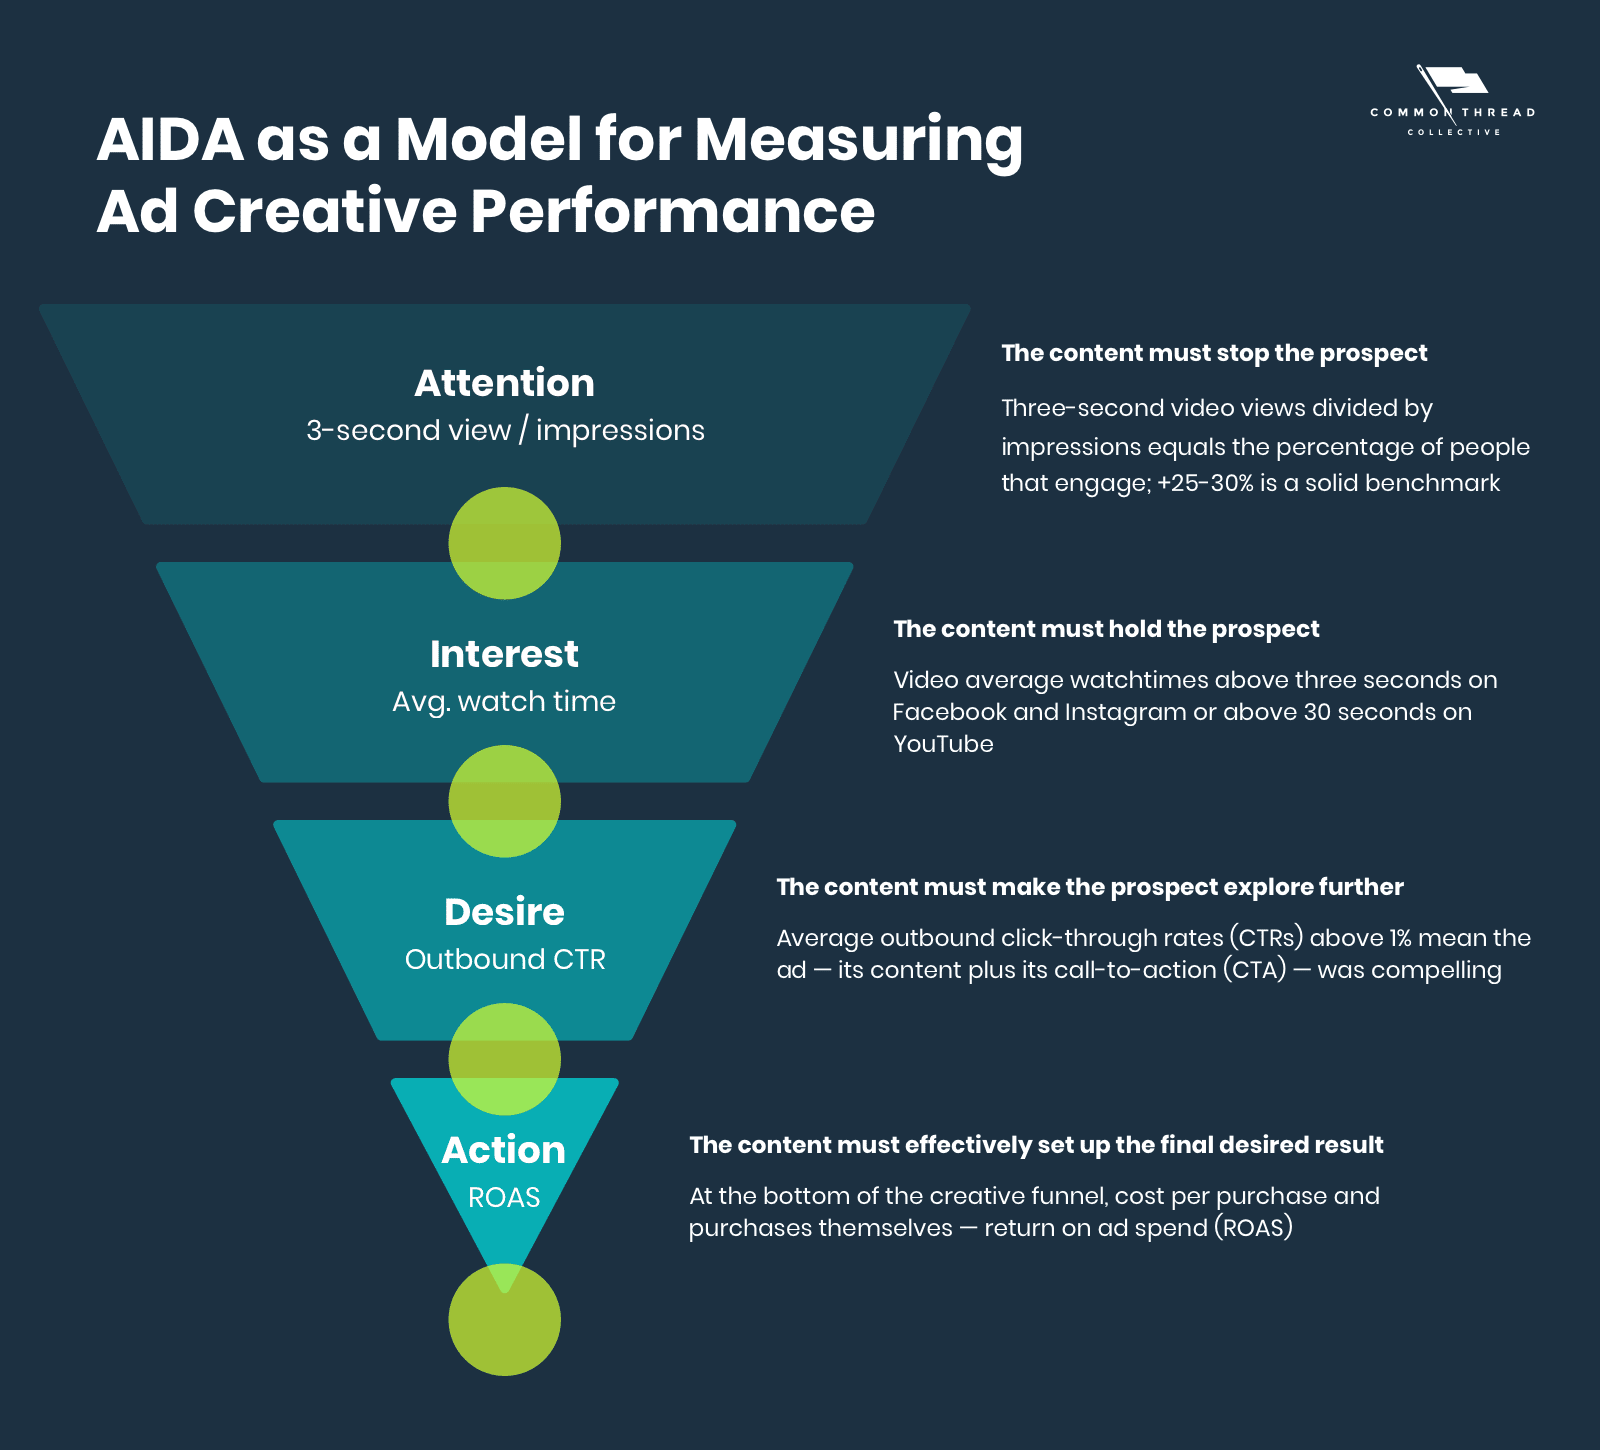 AIDA as a Model for Measuring Ad Creative Performance